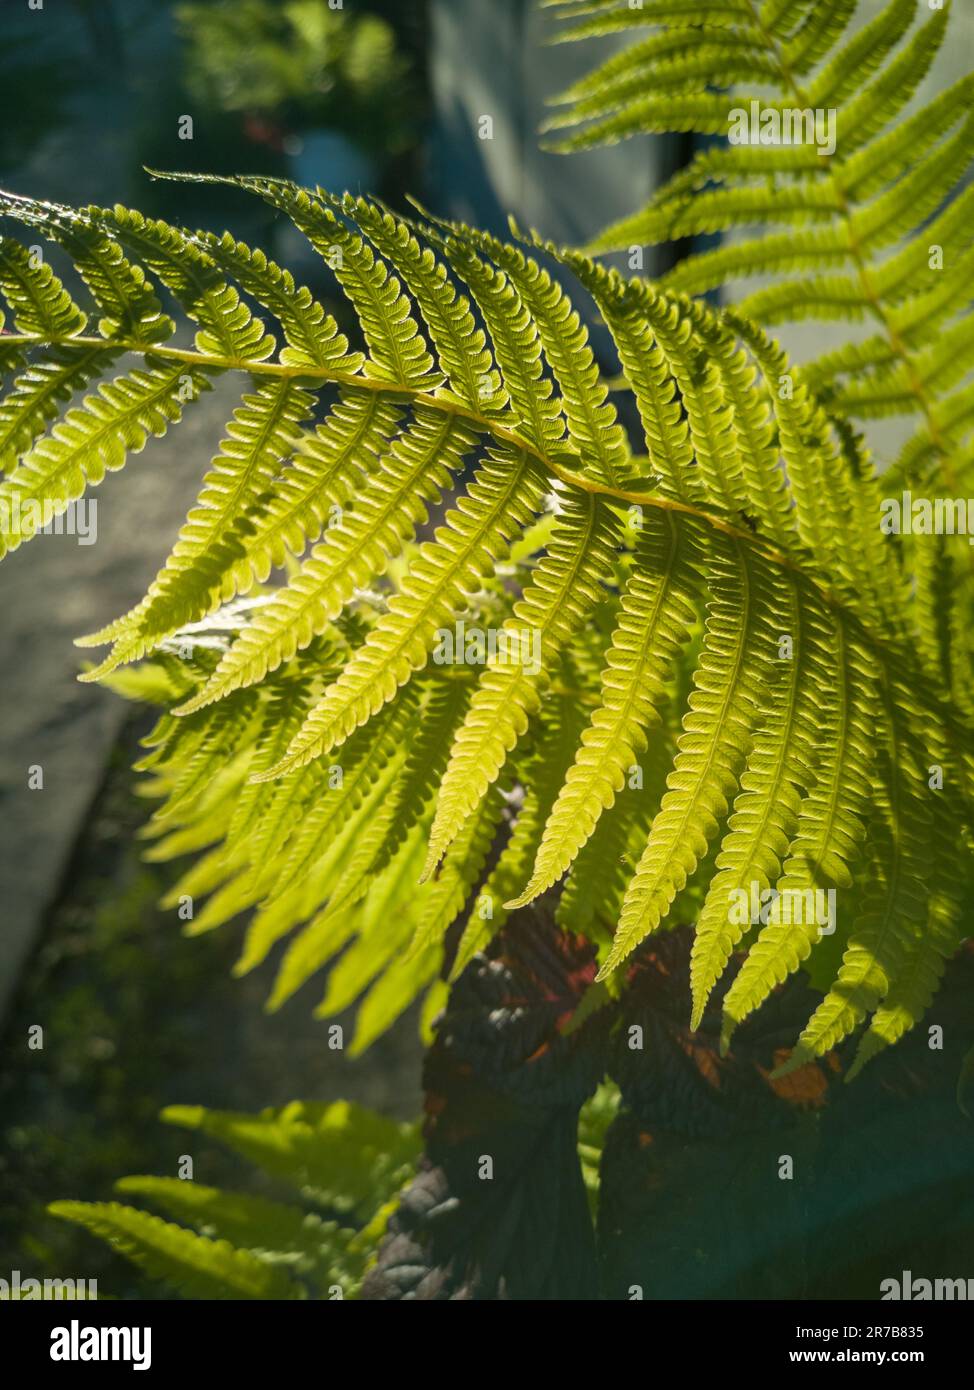 Wild natural green fern leaf in the backlight of the setting sun. Wild fern leaves, osmunda regalis, EAR TREES, OR PIICHES, tree fern branch Cyathea m Stock Photo